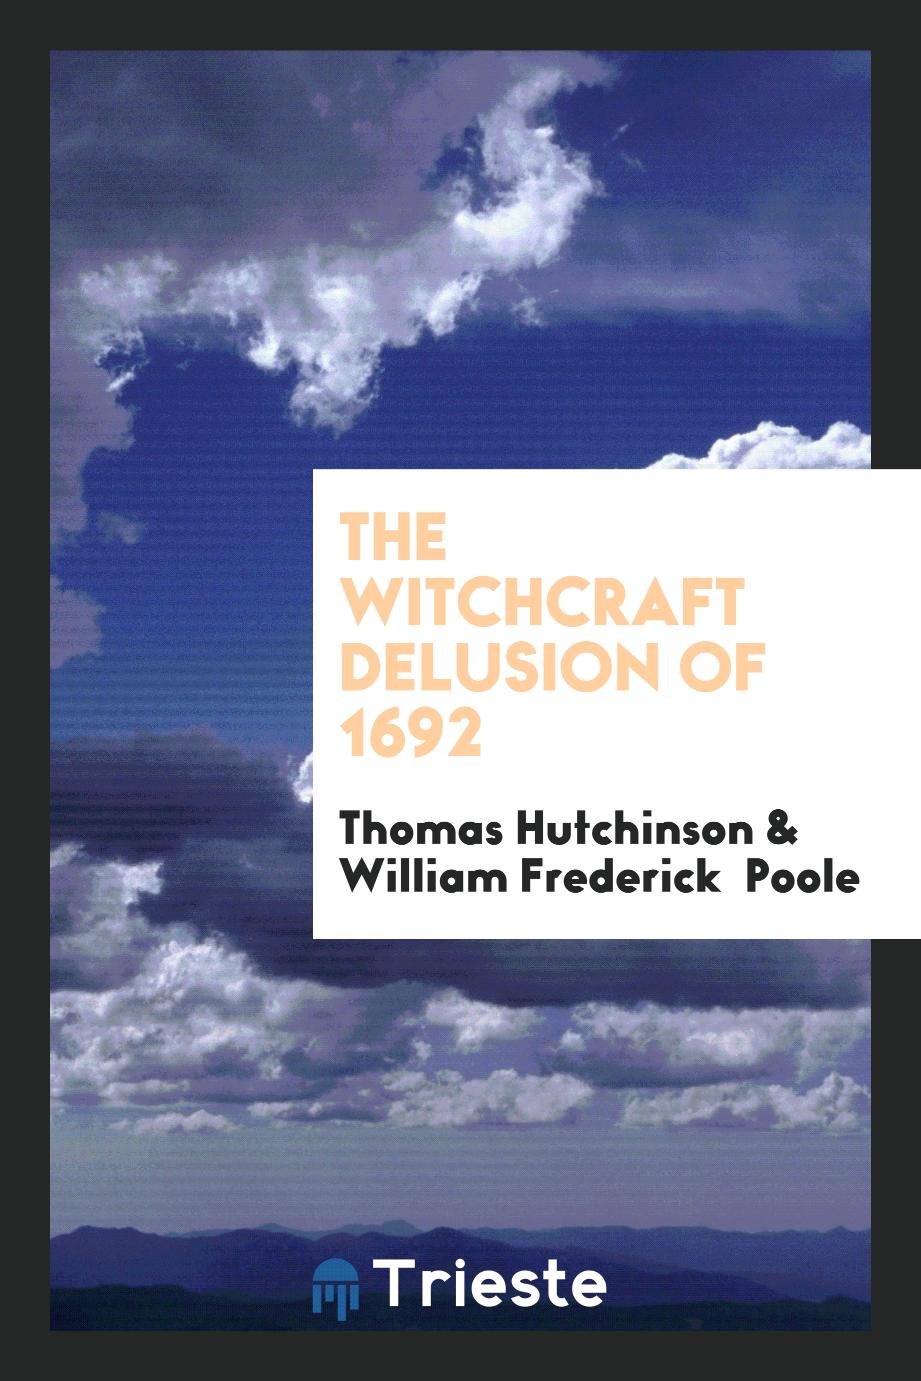 The Witchcraft Delusion of 1692